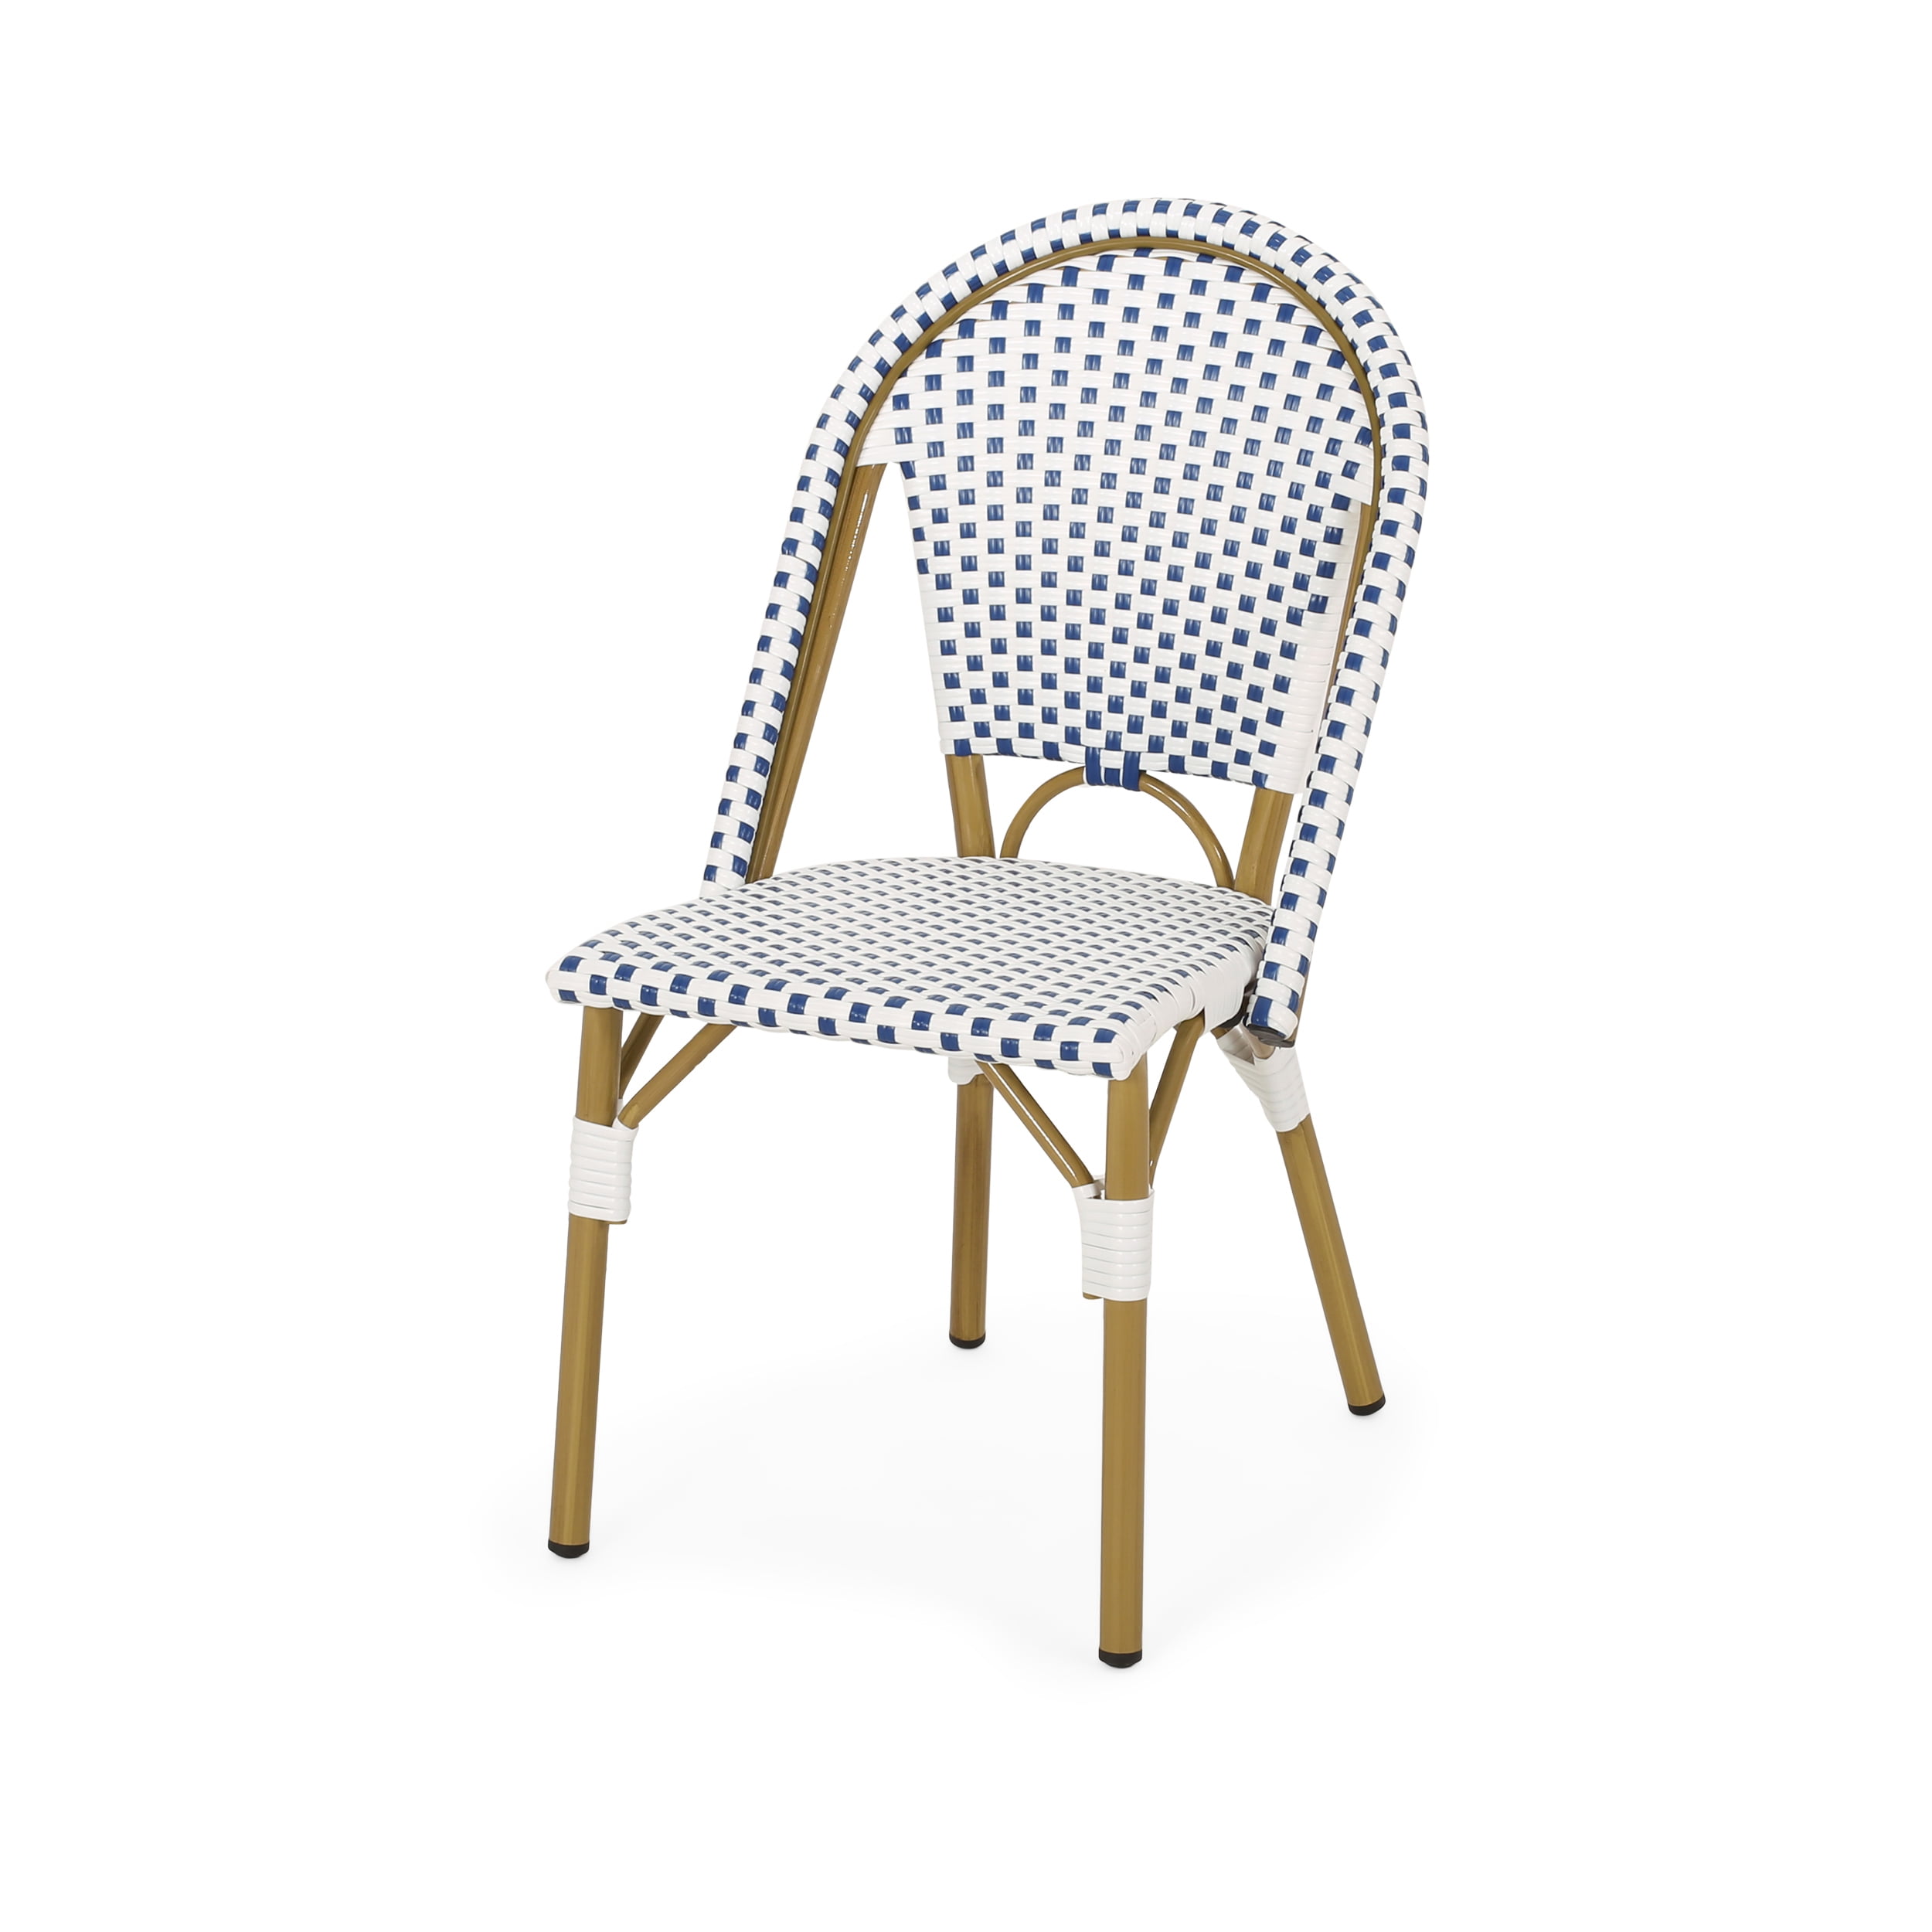 French Bistro chairs in Navy/ white 4 pc Price is per chair 